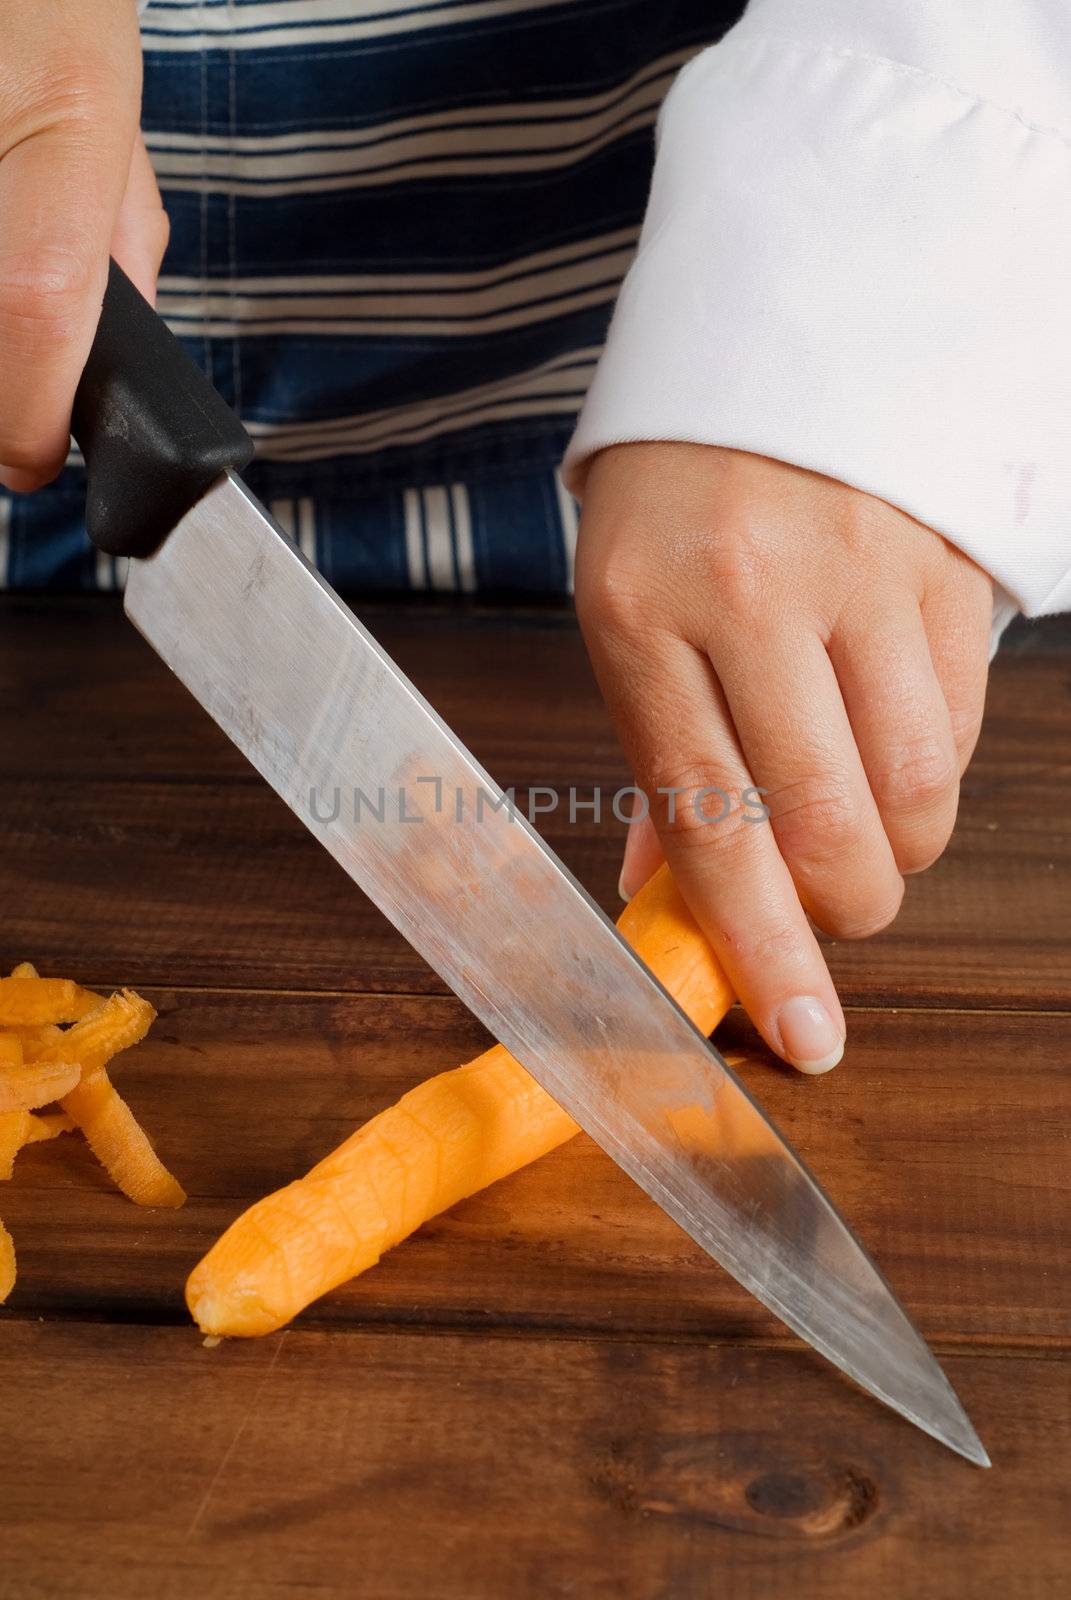 Woman female cook or chef slicing or cutting a carrot with kitchen knife on wooden board